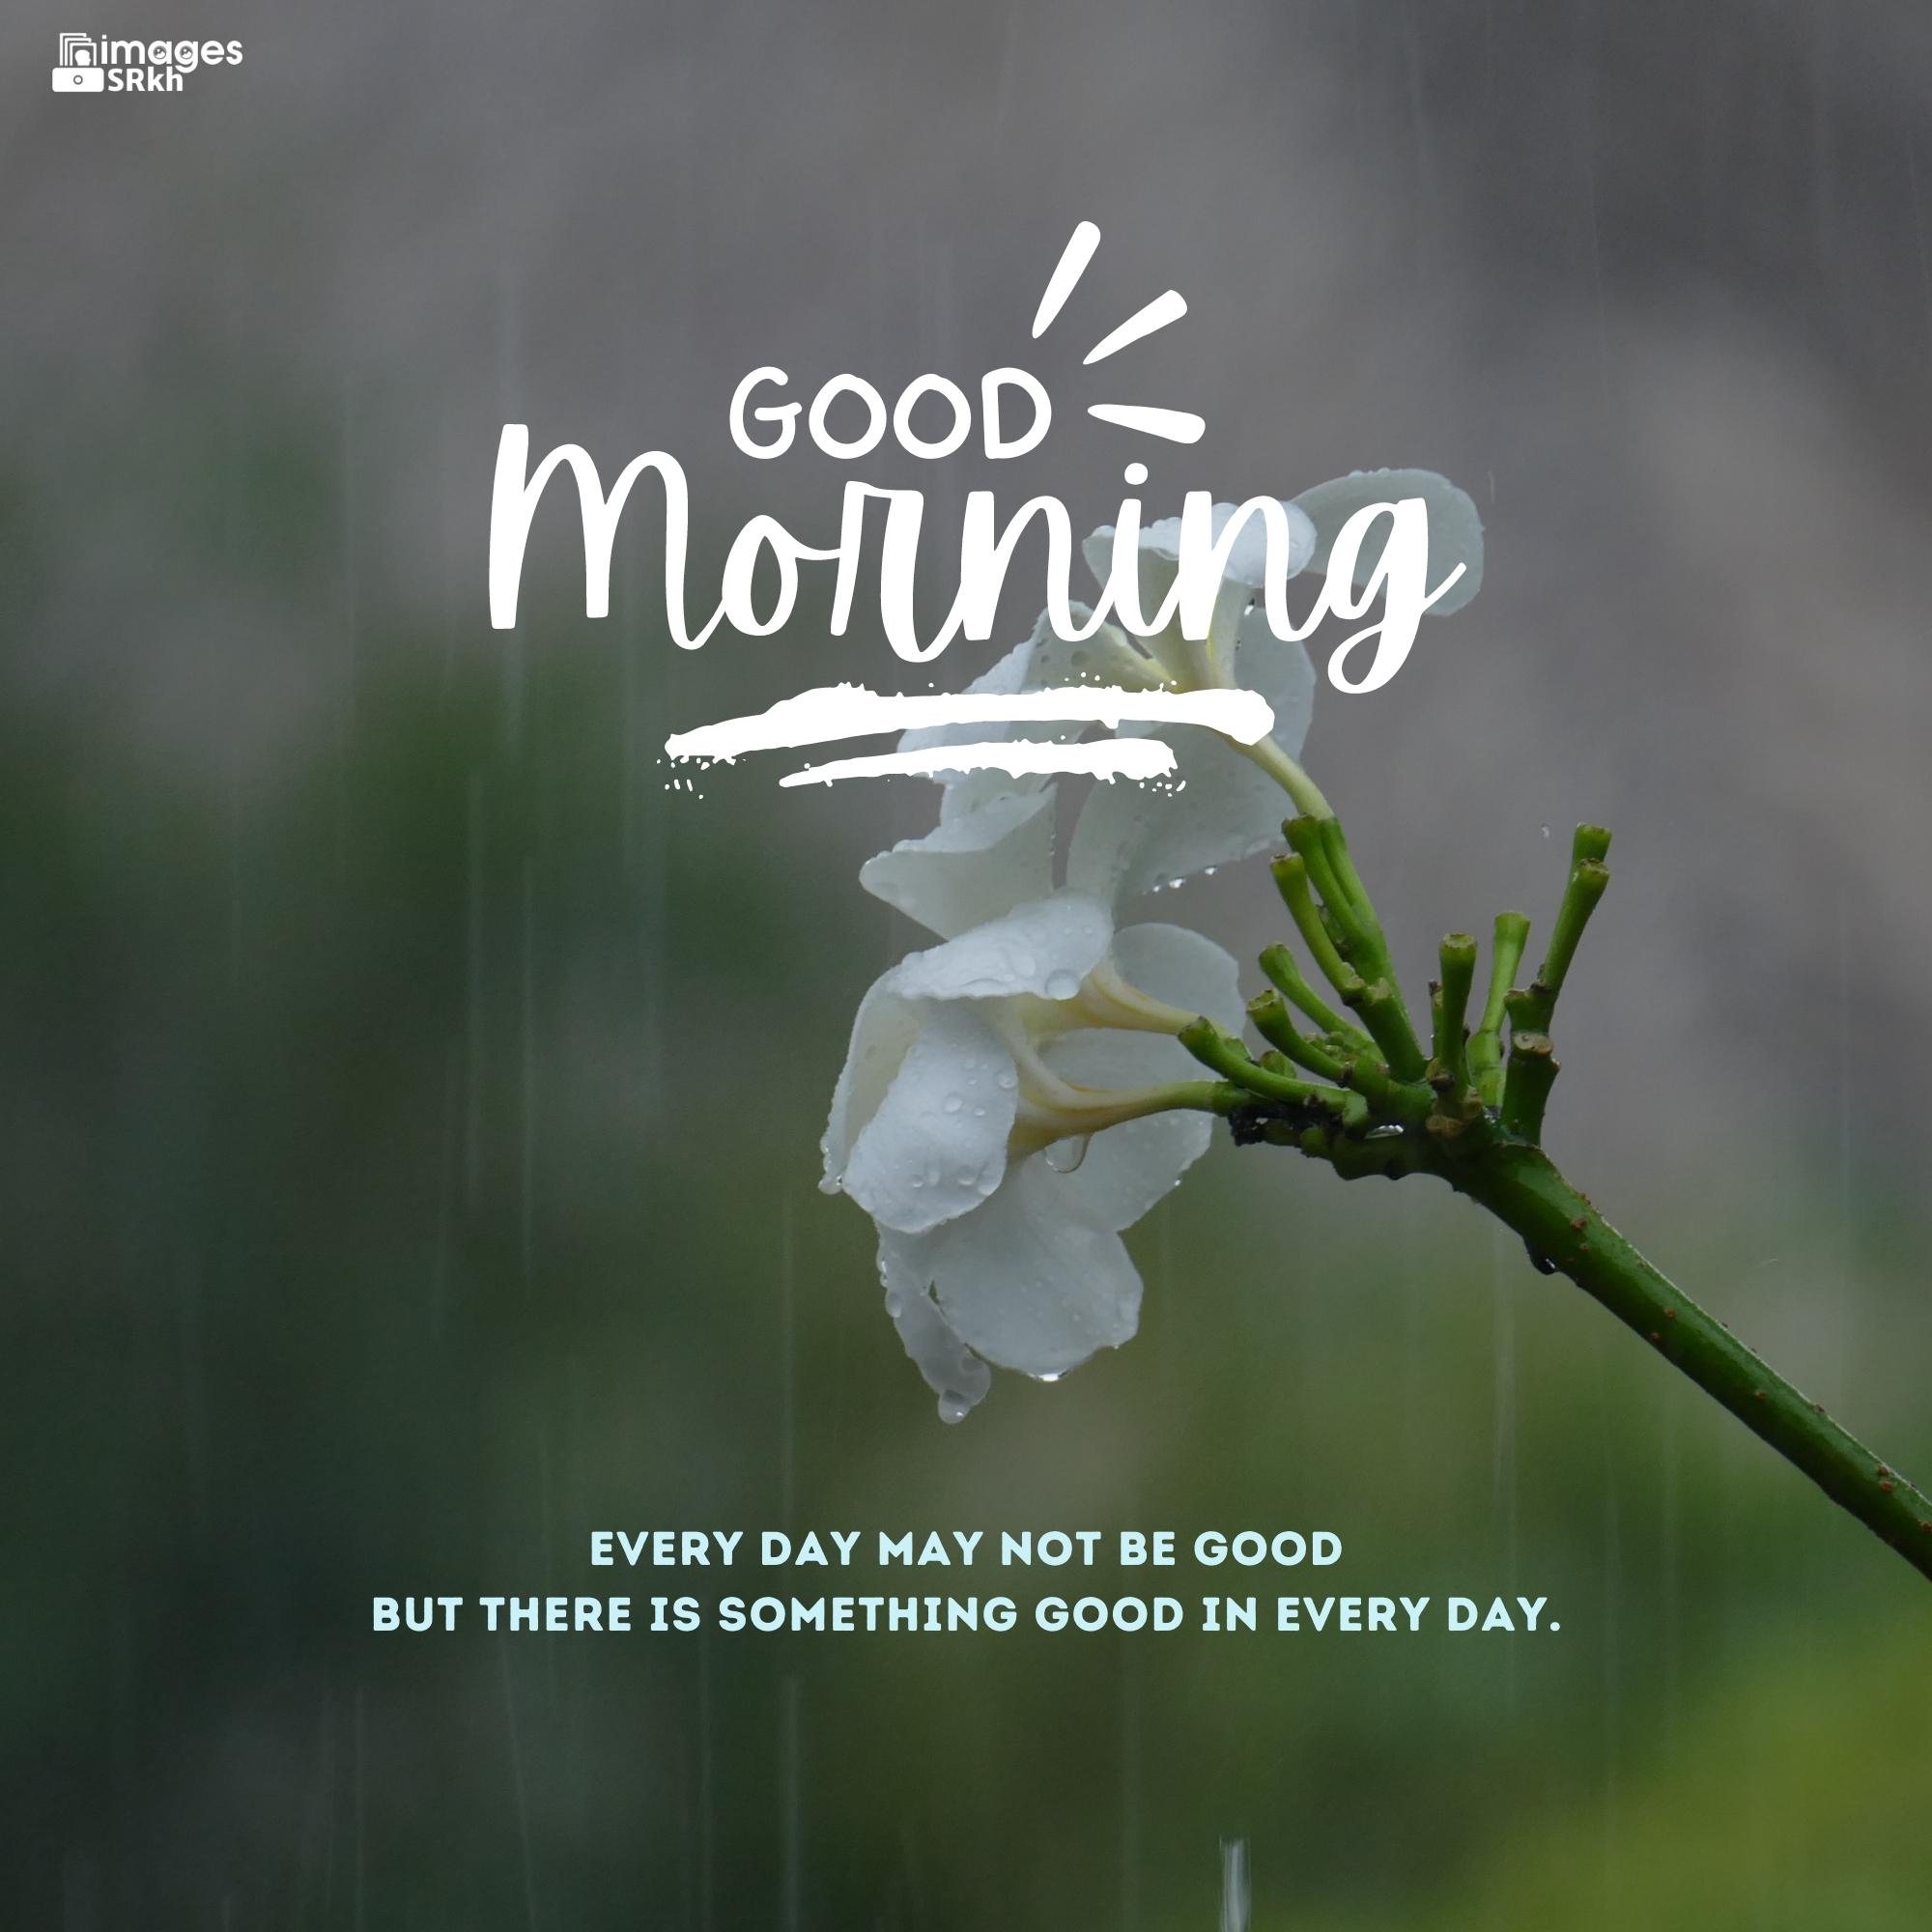 Good Morning Images With Rainy Day Hd